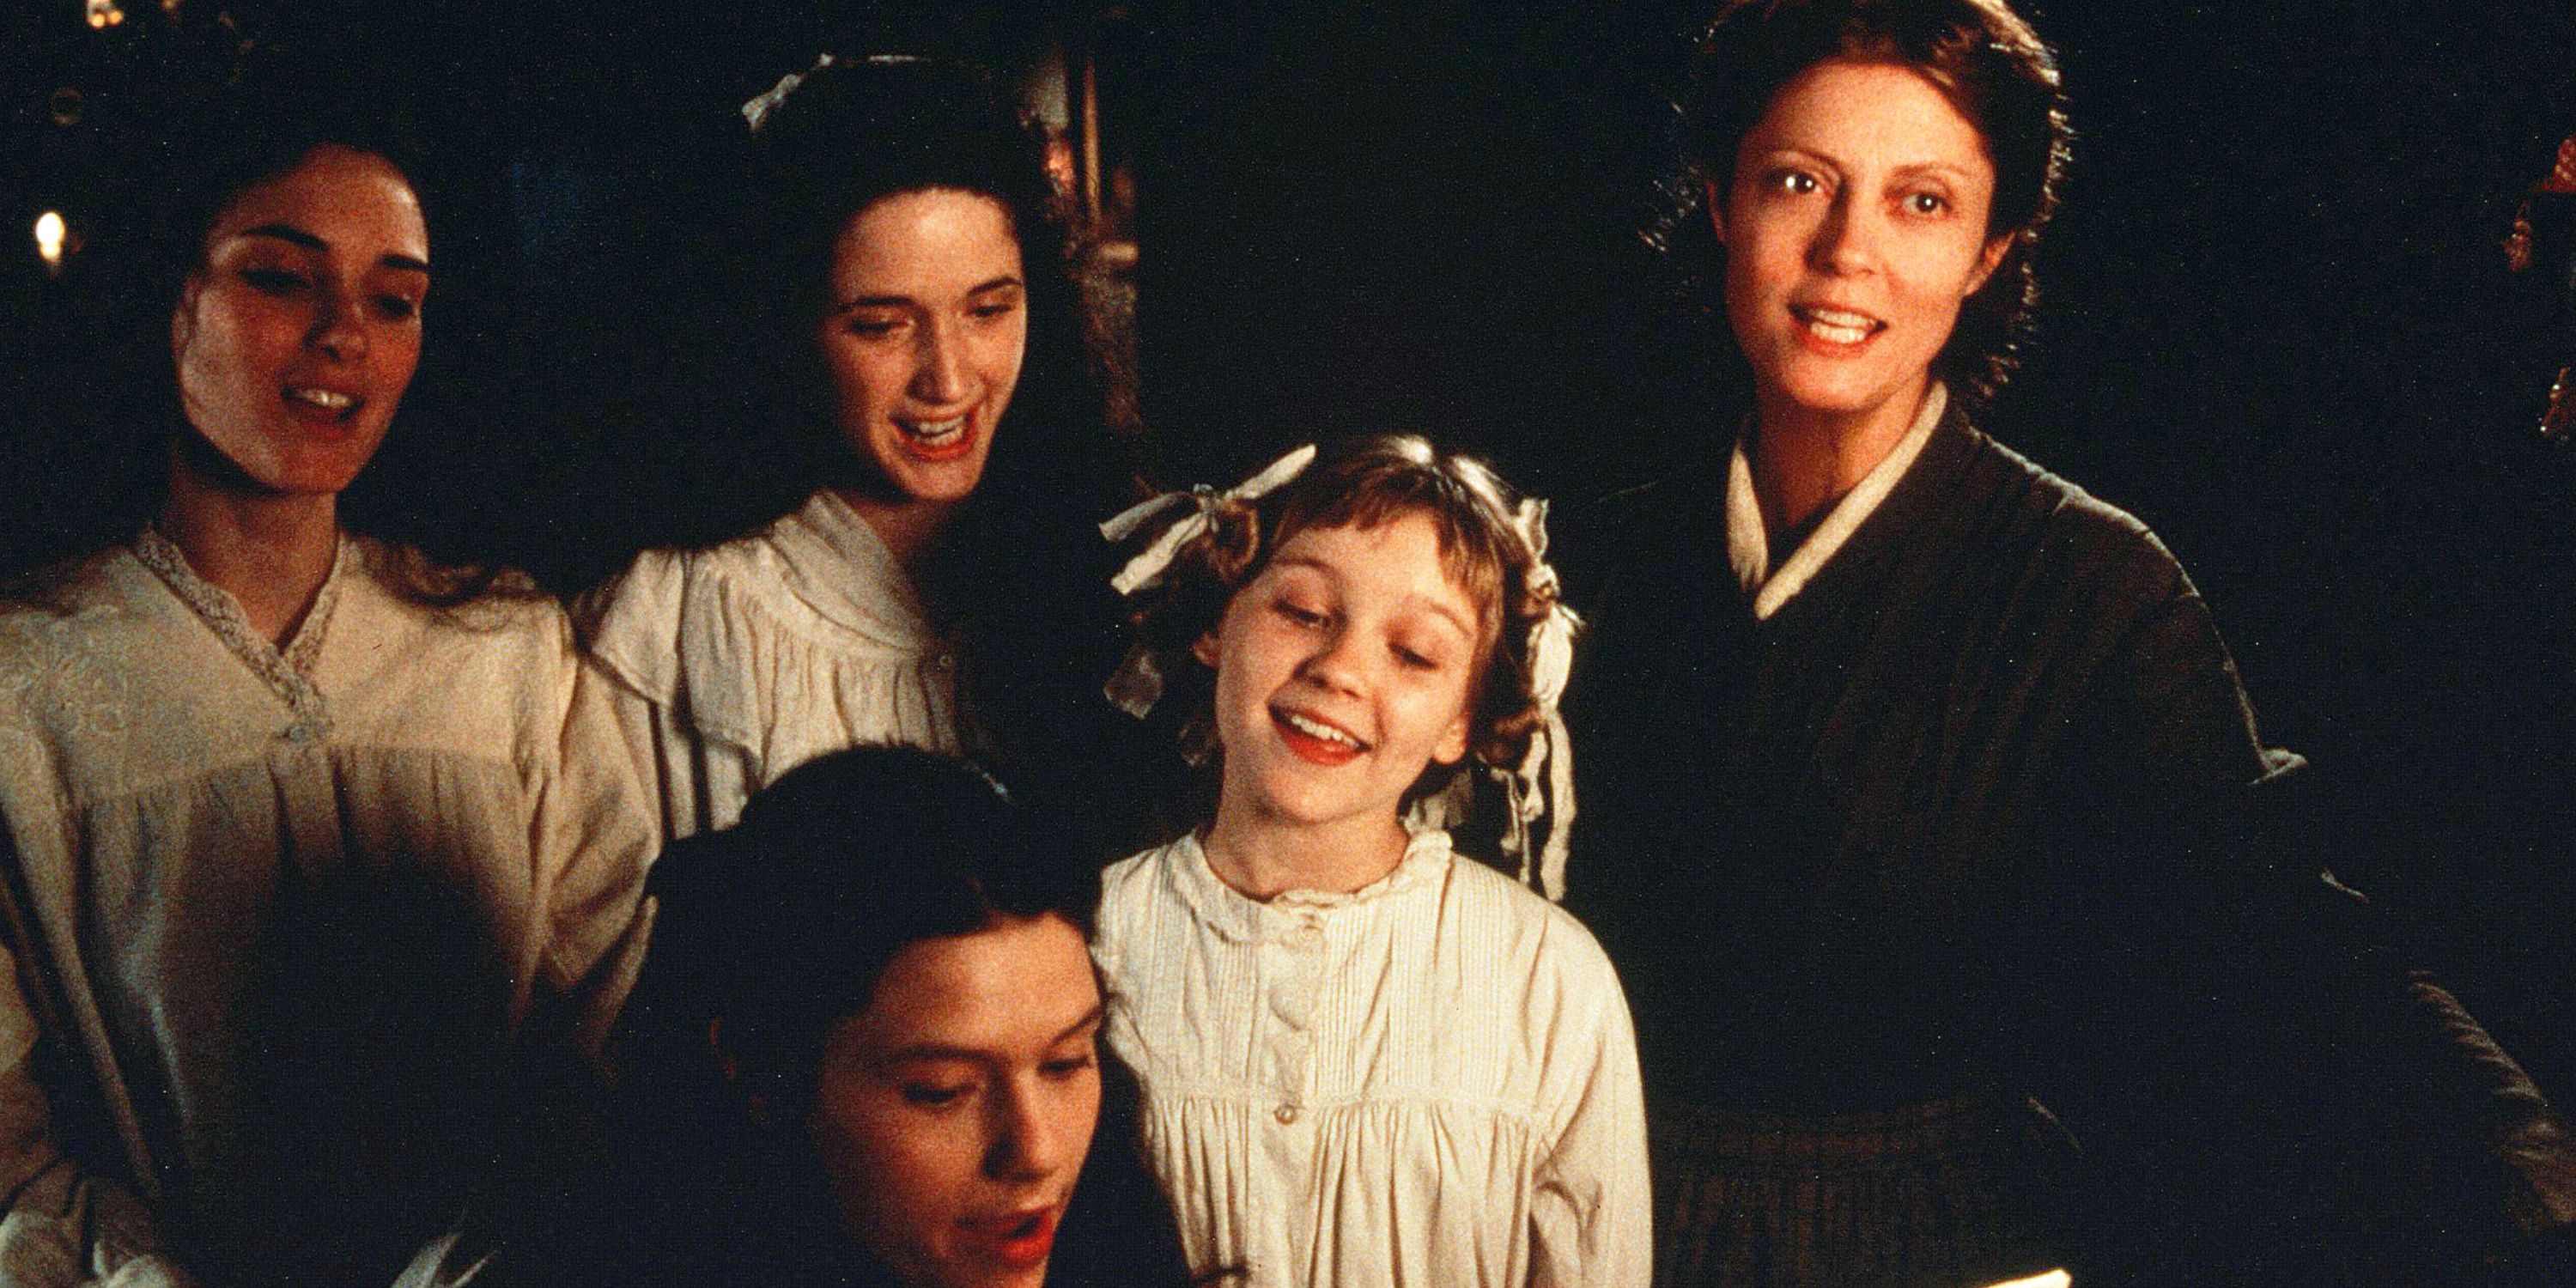 Susan Sarandon as Marmee March in 'Little Women', with Winona Ryder as Jo, Kirsten Dunst as Amy, Trini Alvarado as Meg, and Clare Danes as Beth, the March sisters. They are by a piano singing. 